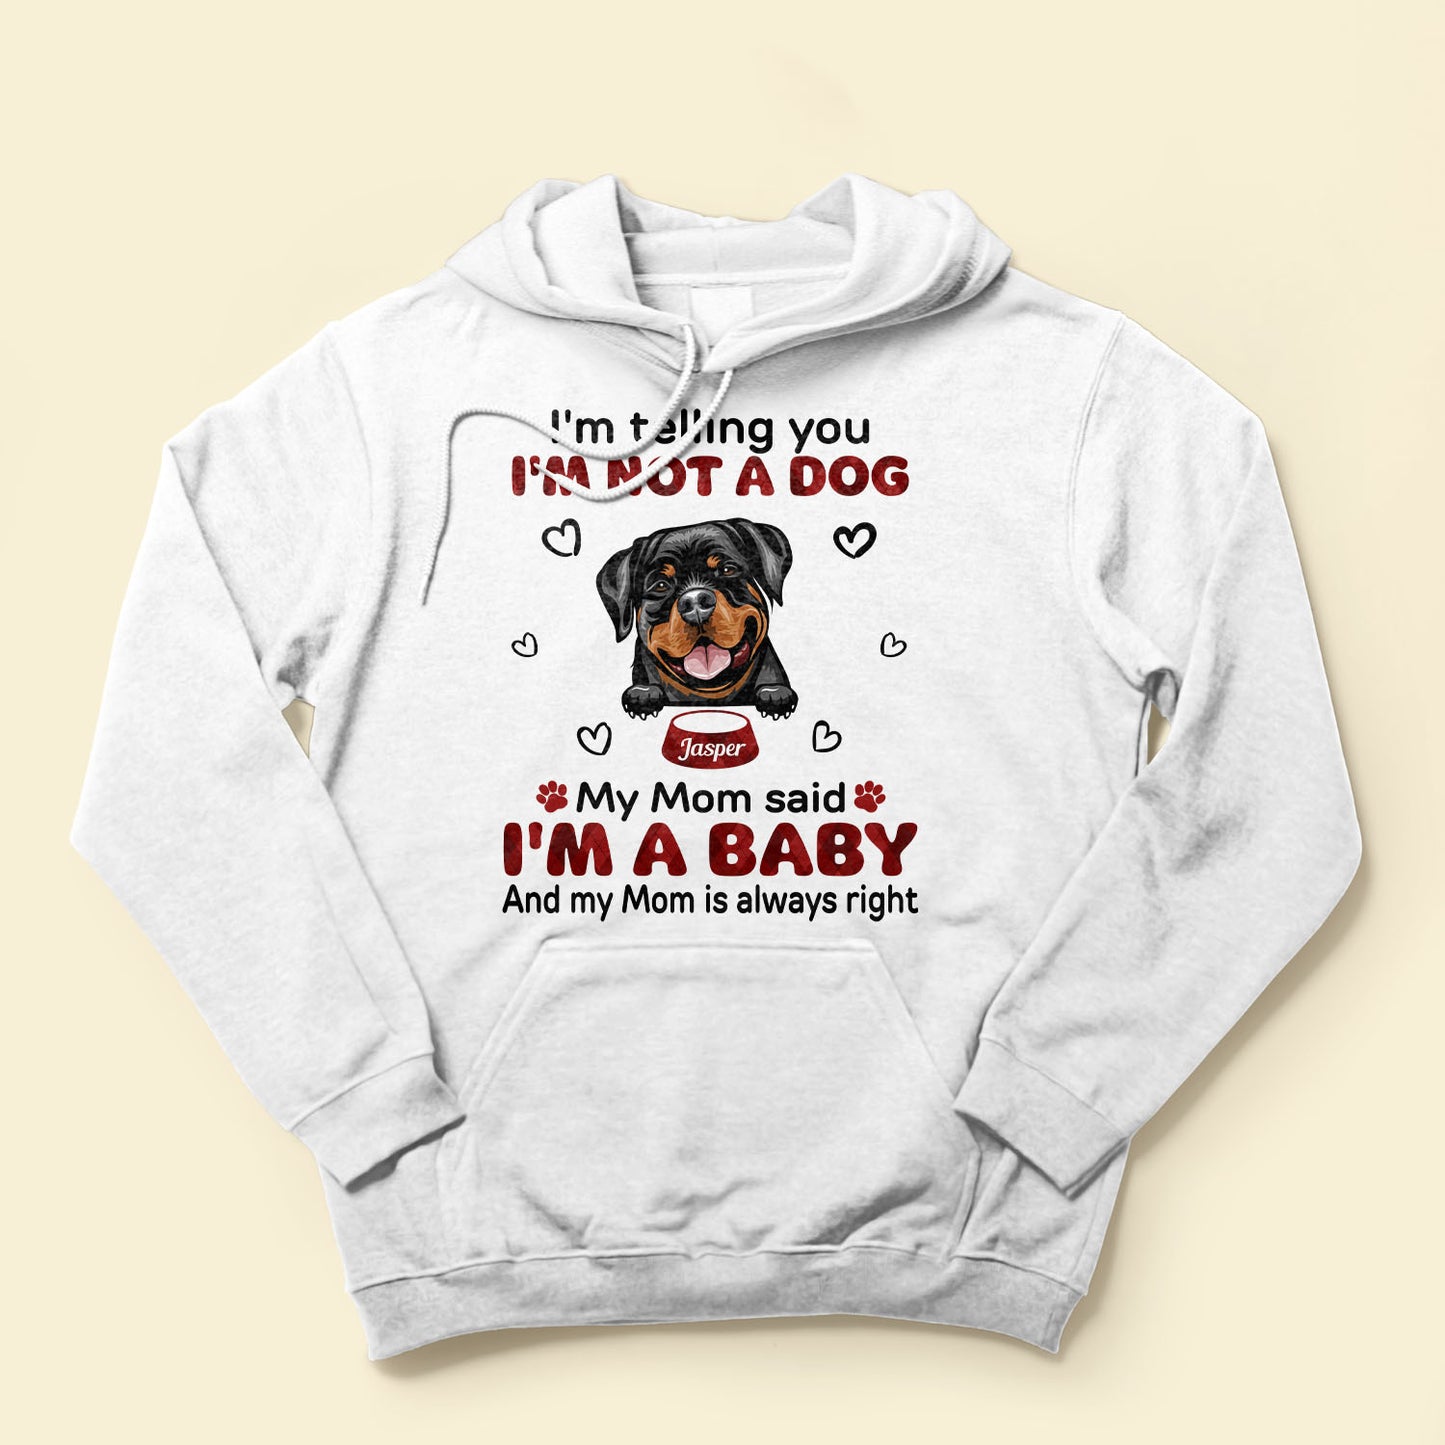 My Mom Said I'm A Baby - Personalized Shirt